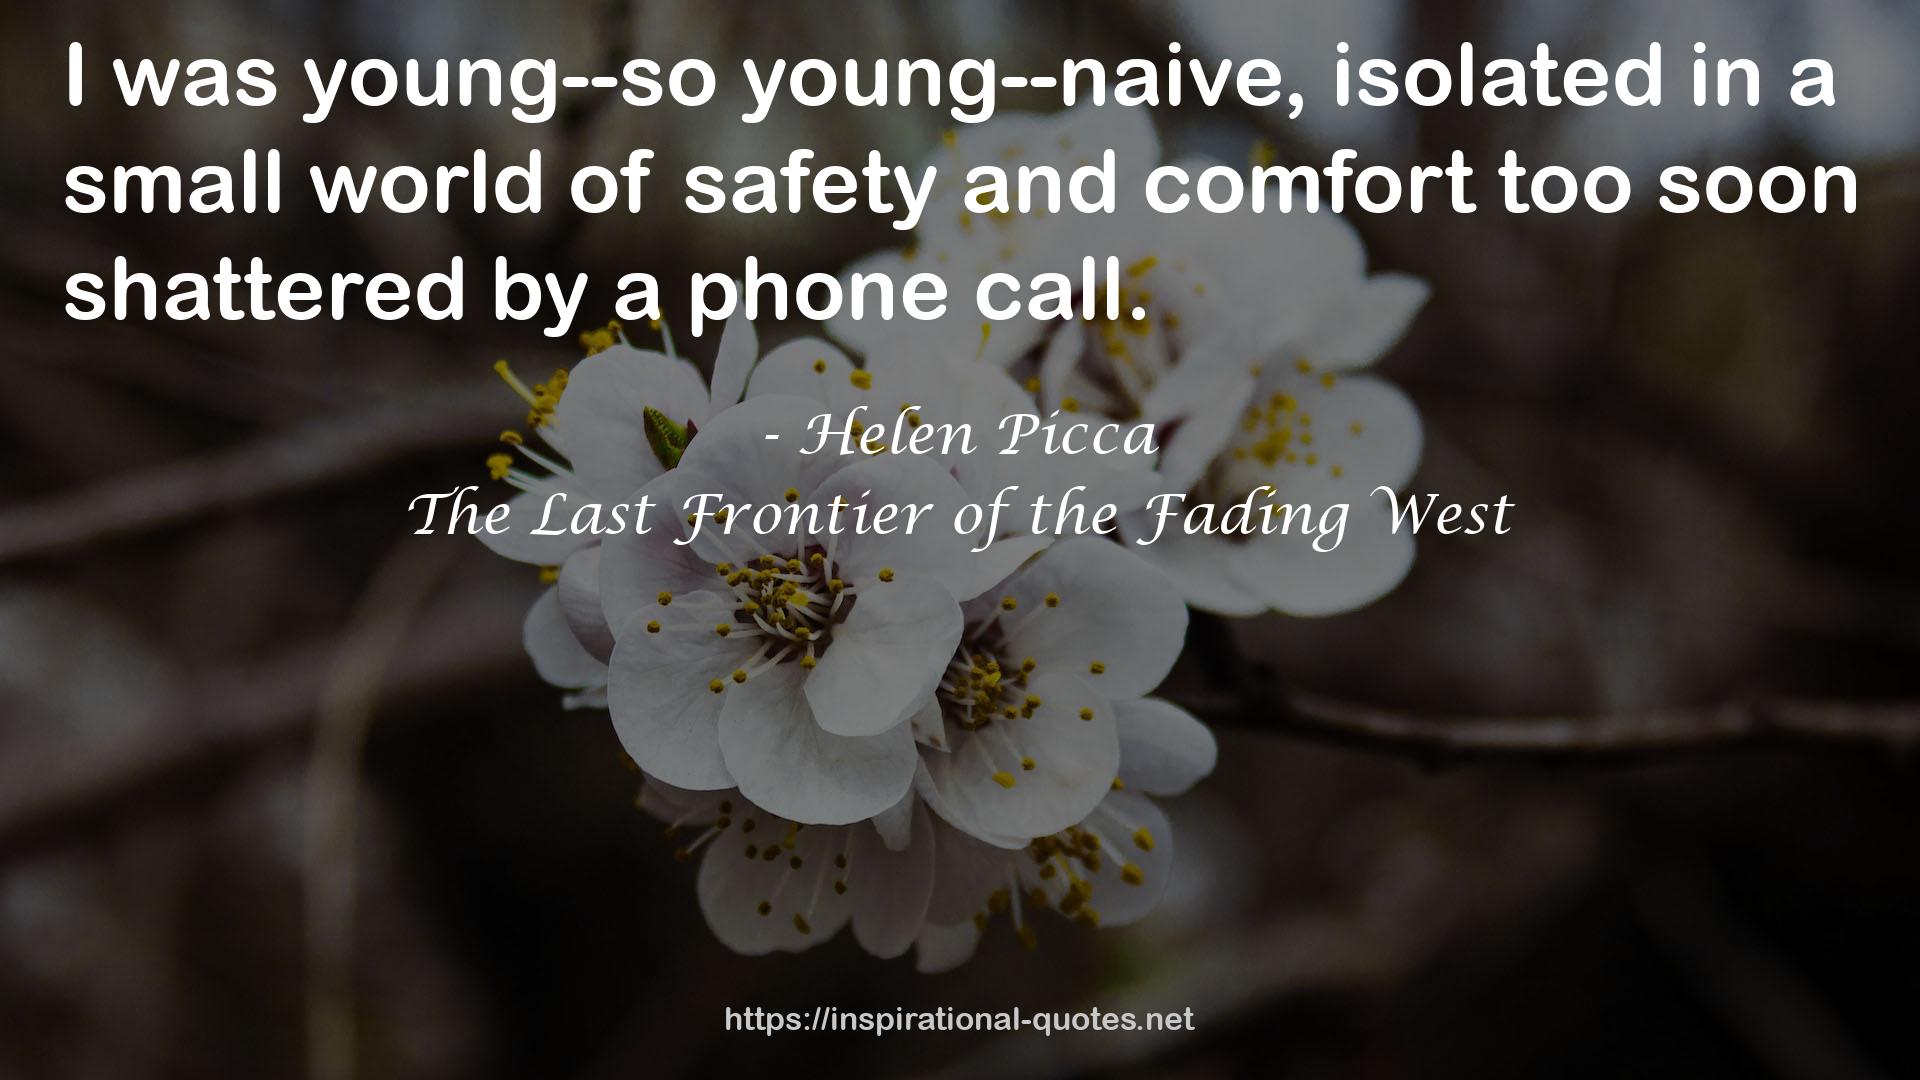 The Last Frontier of the Fading West QUOTES